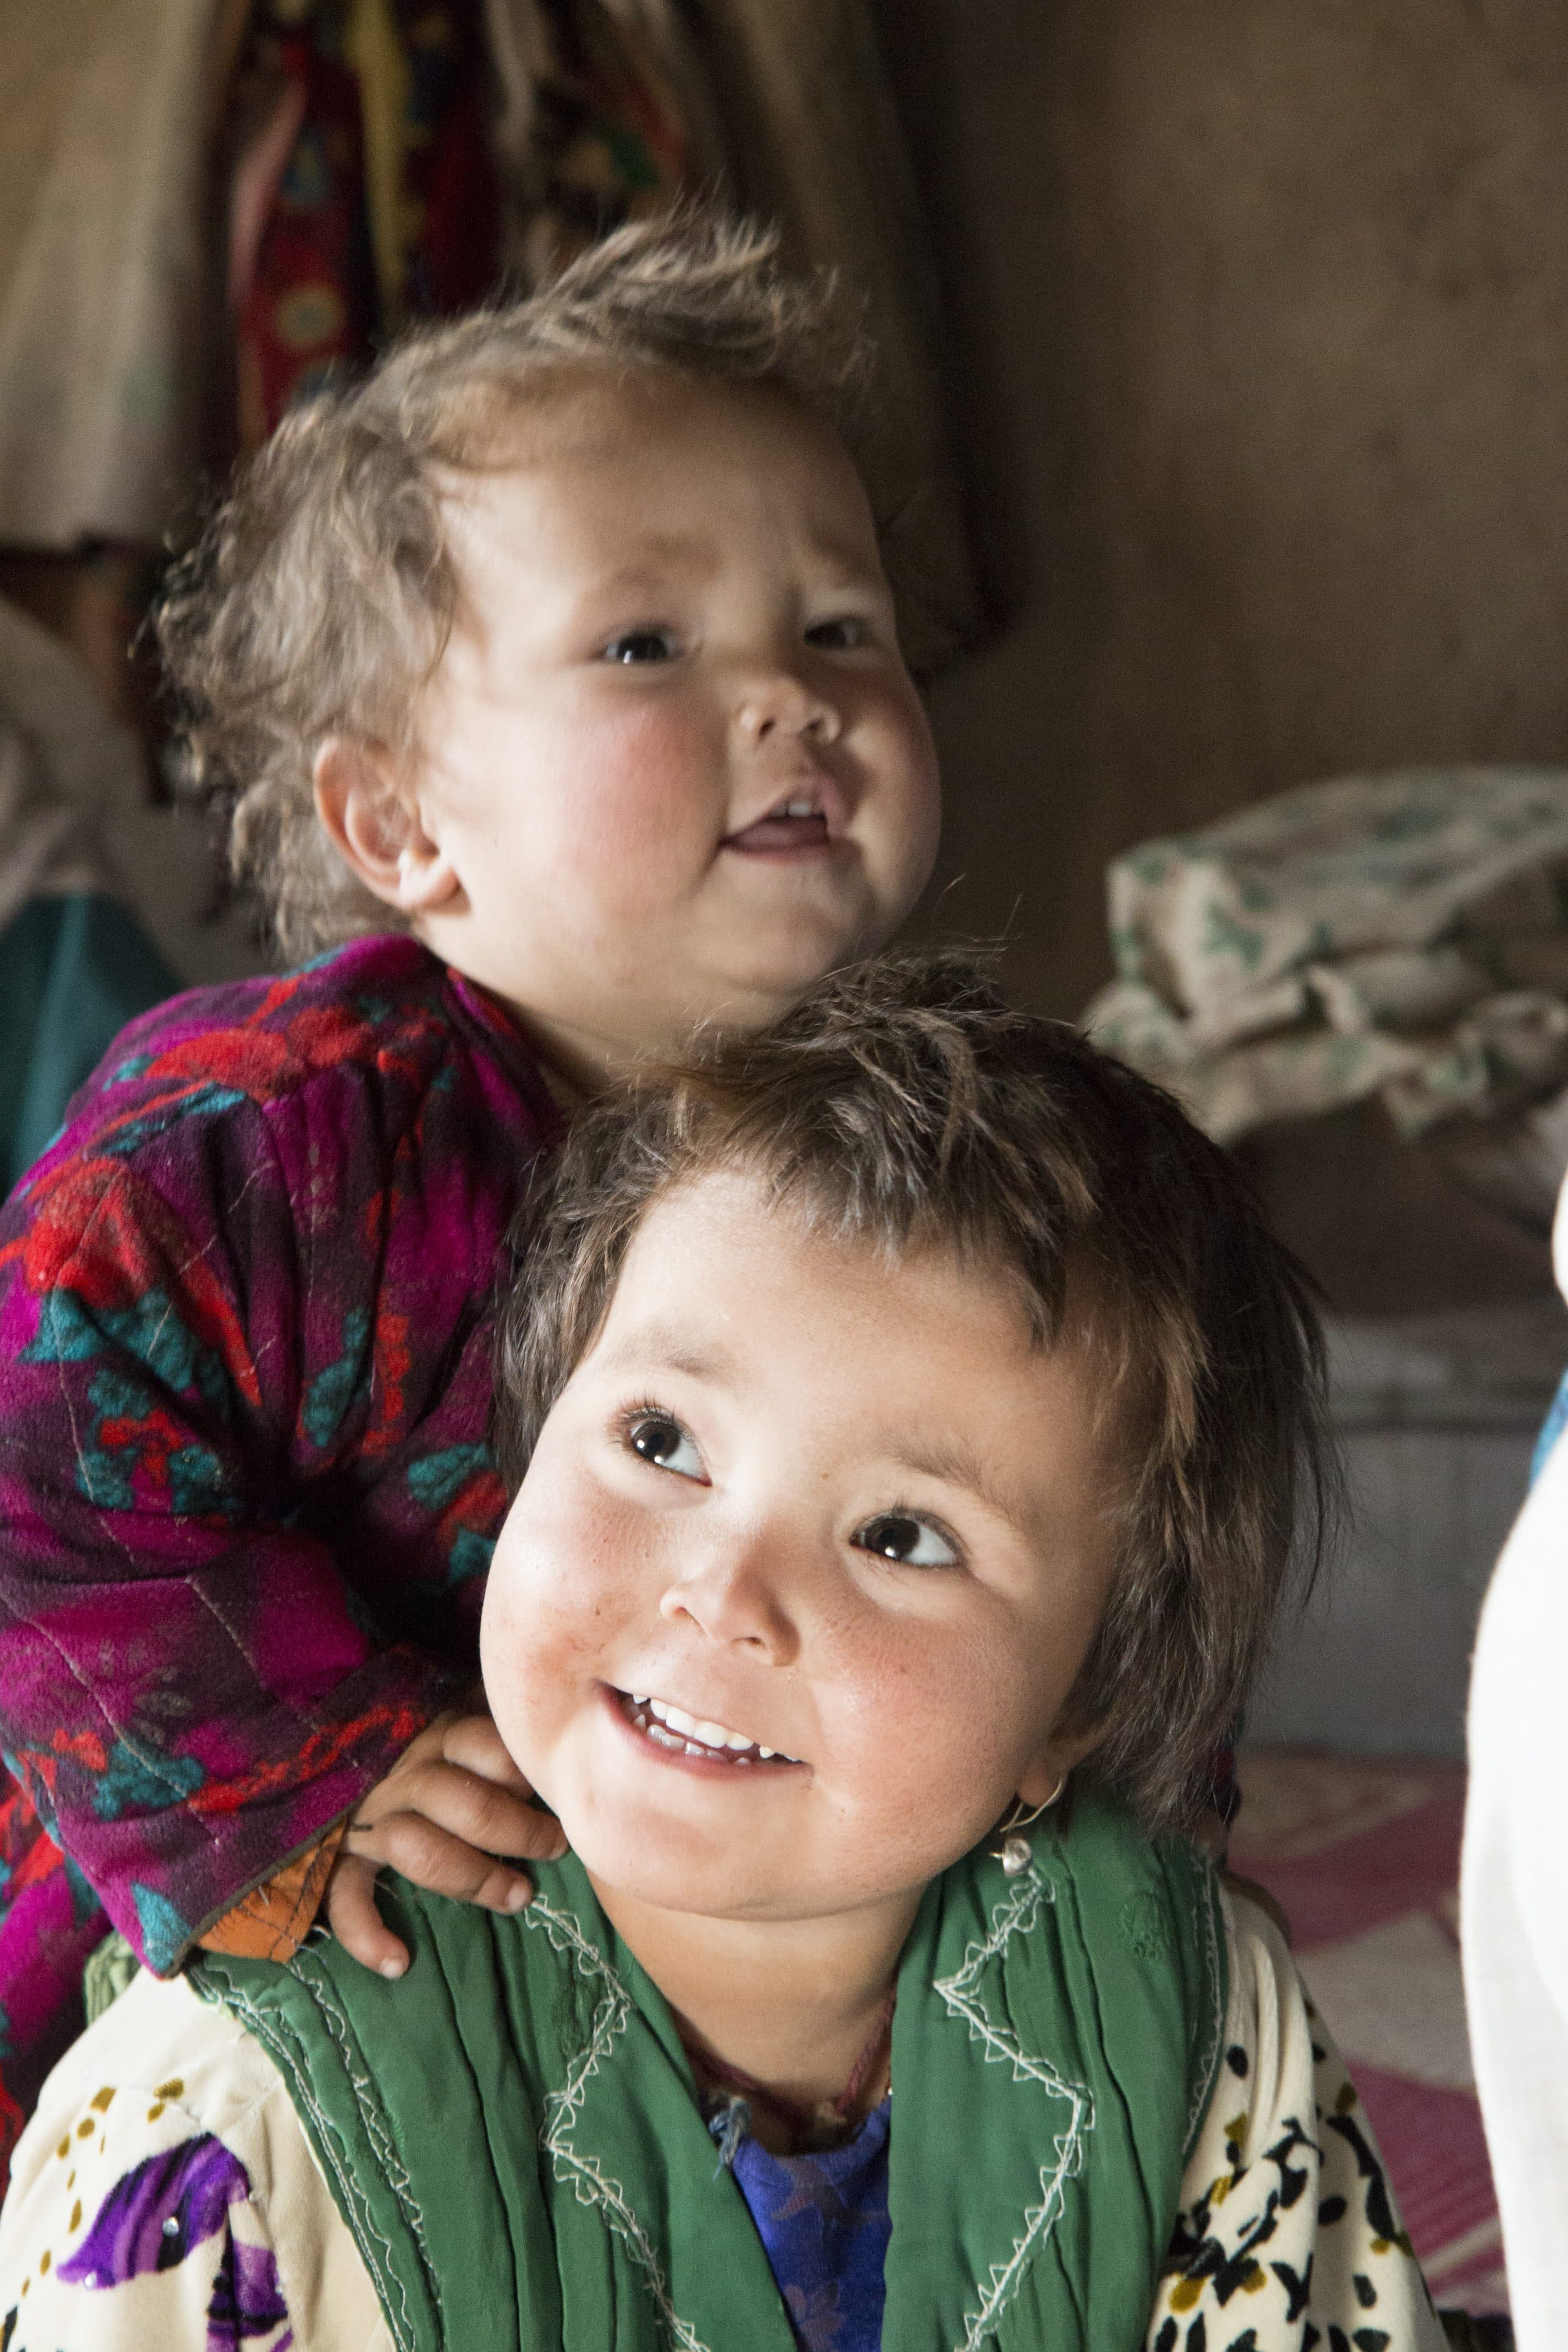 Medina and Zabiullah, children of Abdul Rahim, who was able to quit his drug addiction thanks to Islamic Relief's drug rehabilitation clinic in Afghanistan.